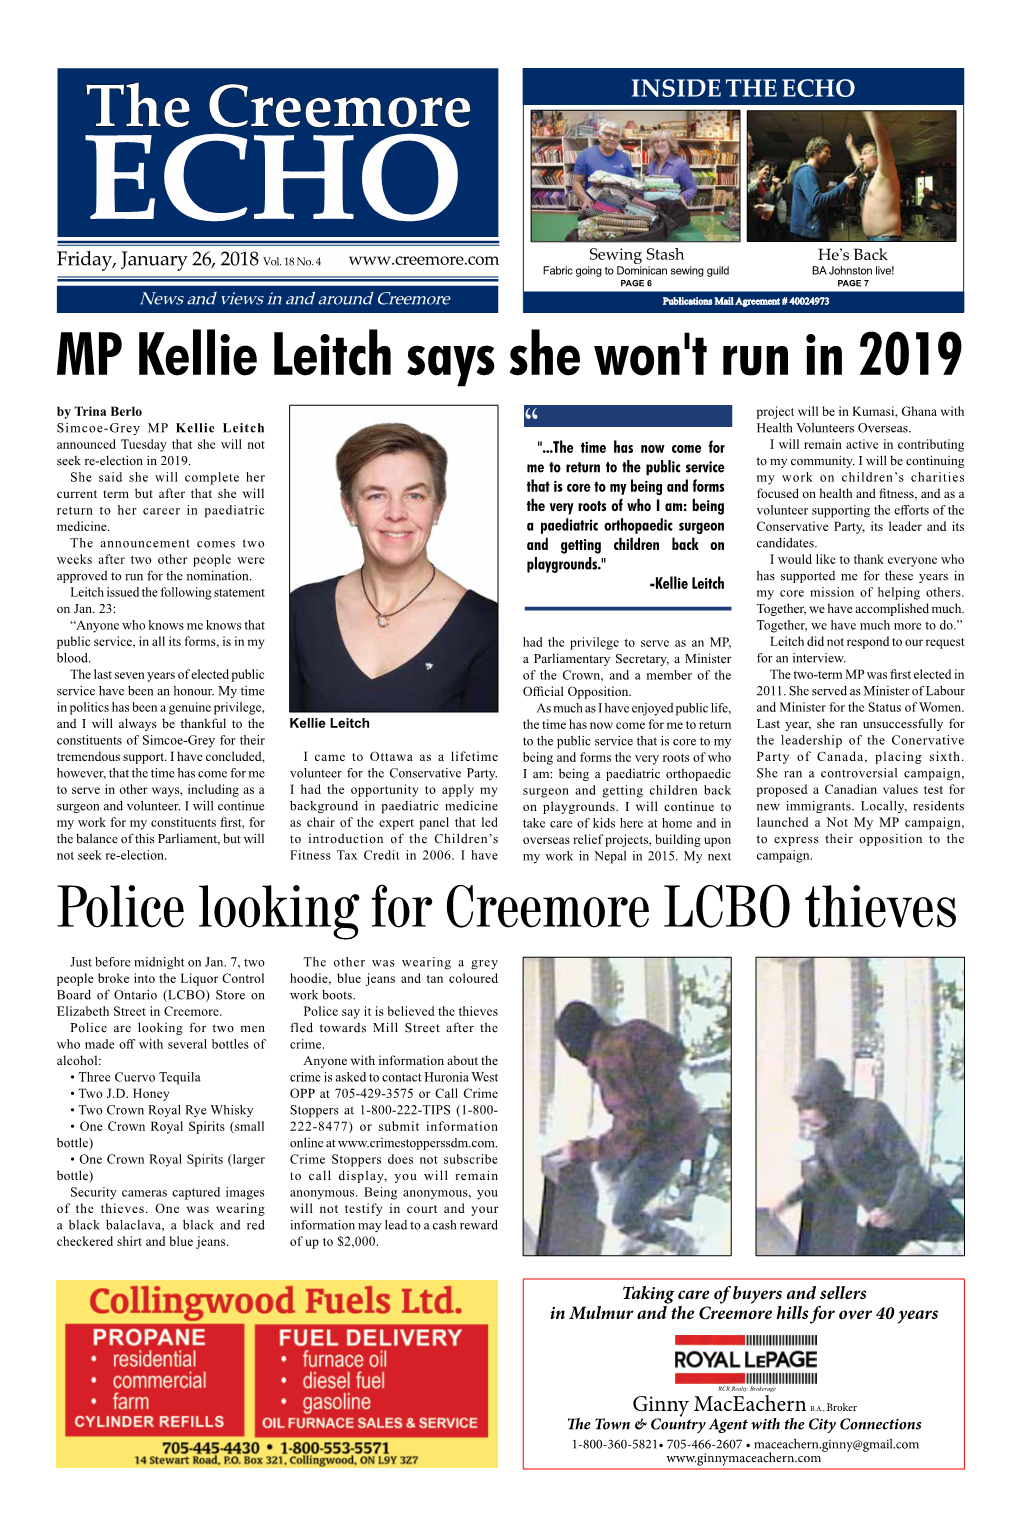 MP Kellie Leitch Says She Won't Run in 2019 the Creemore